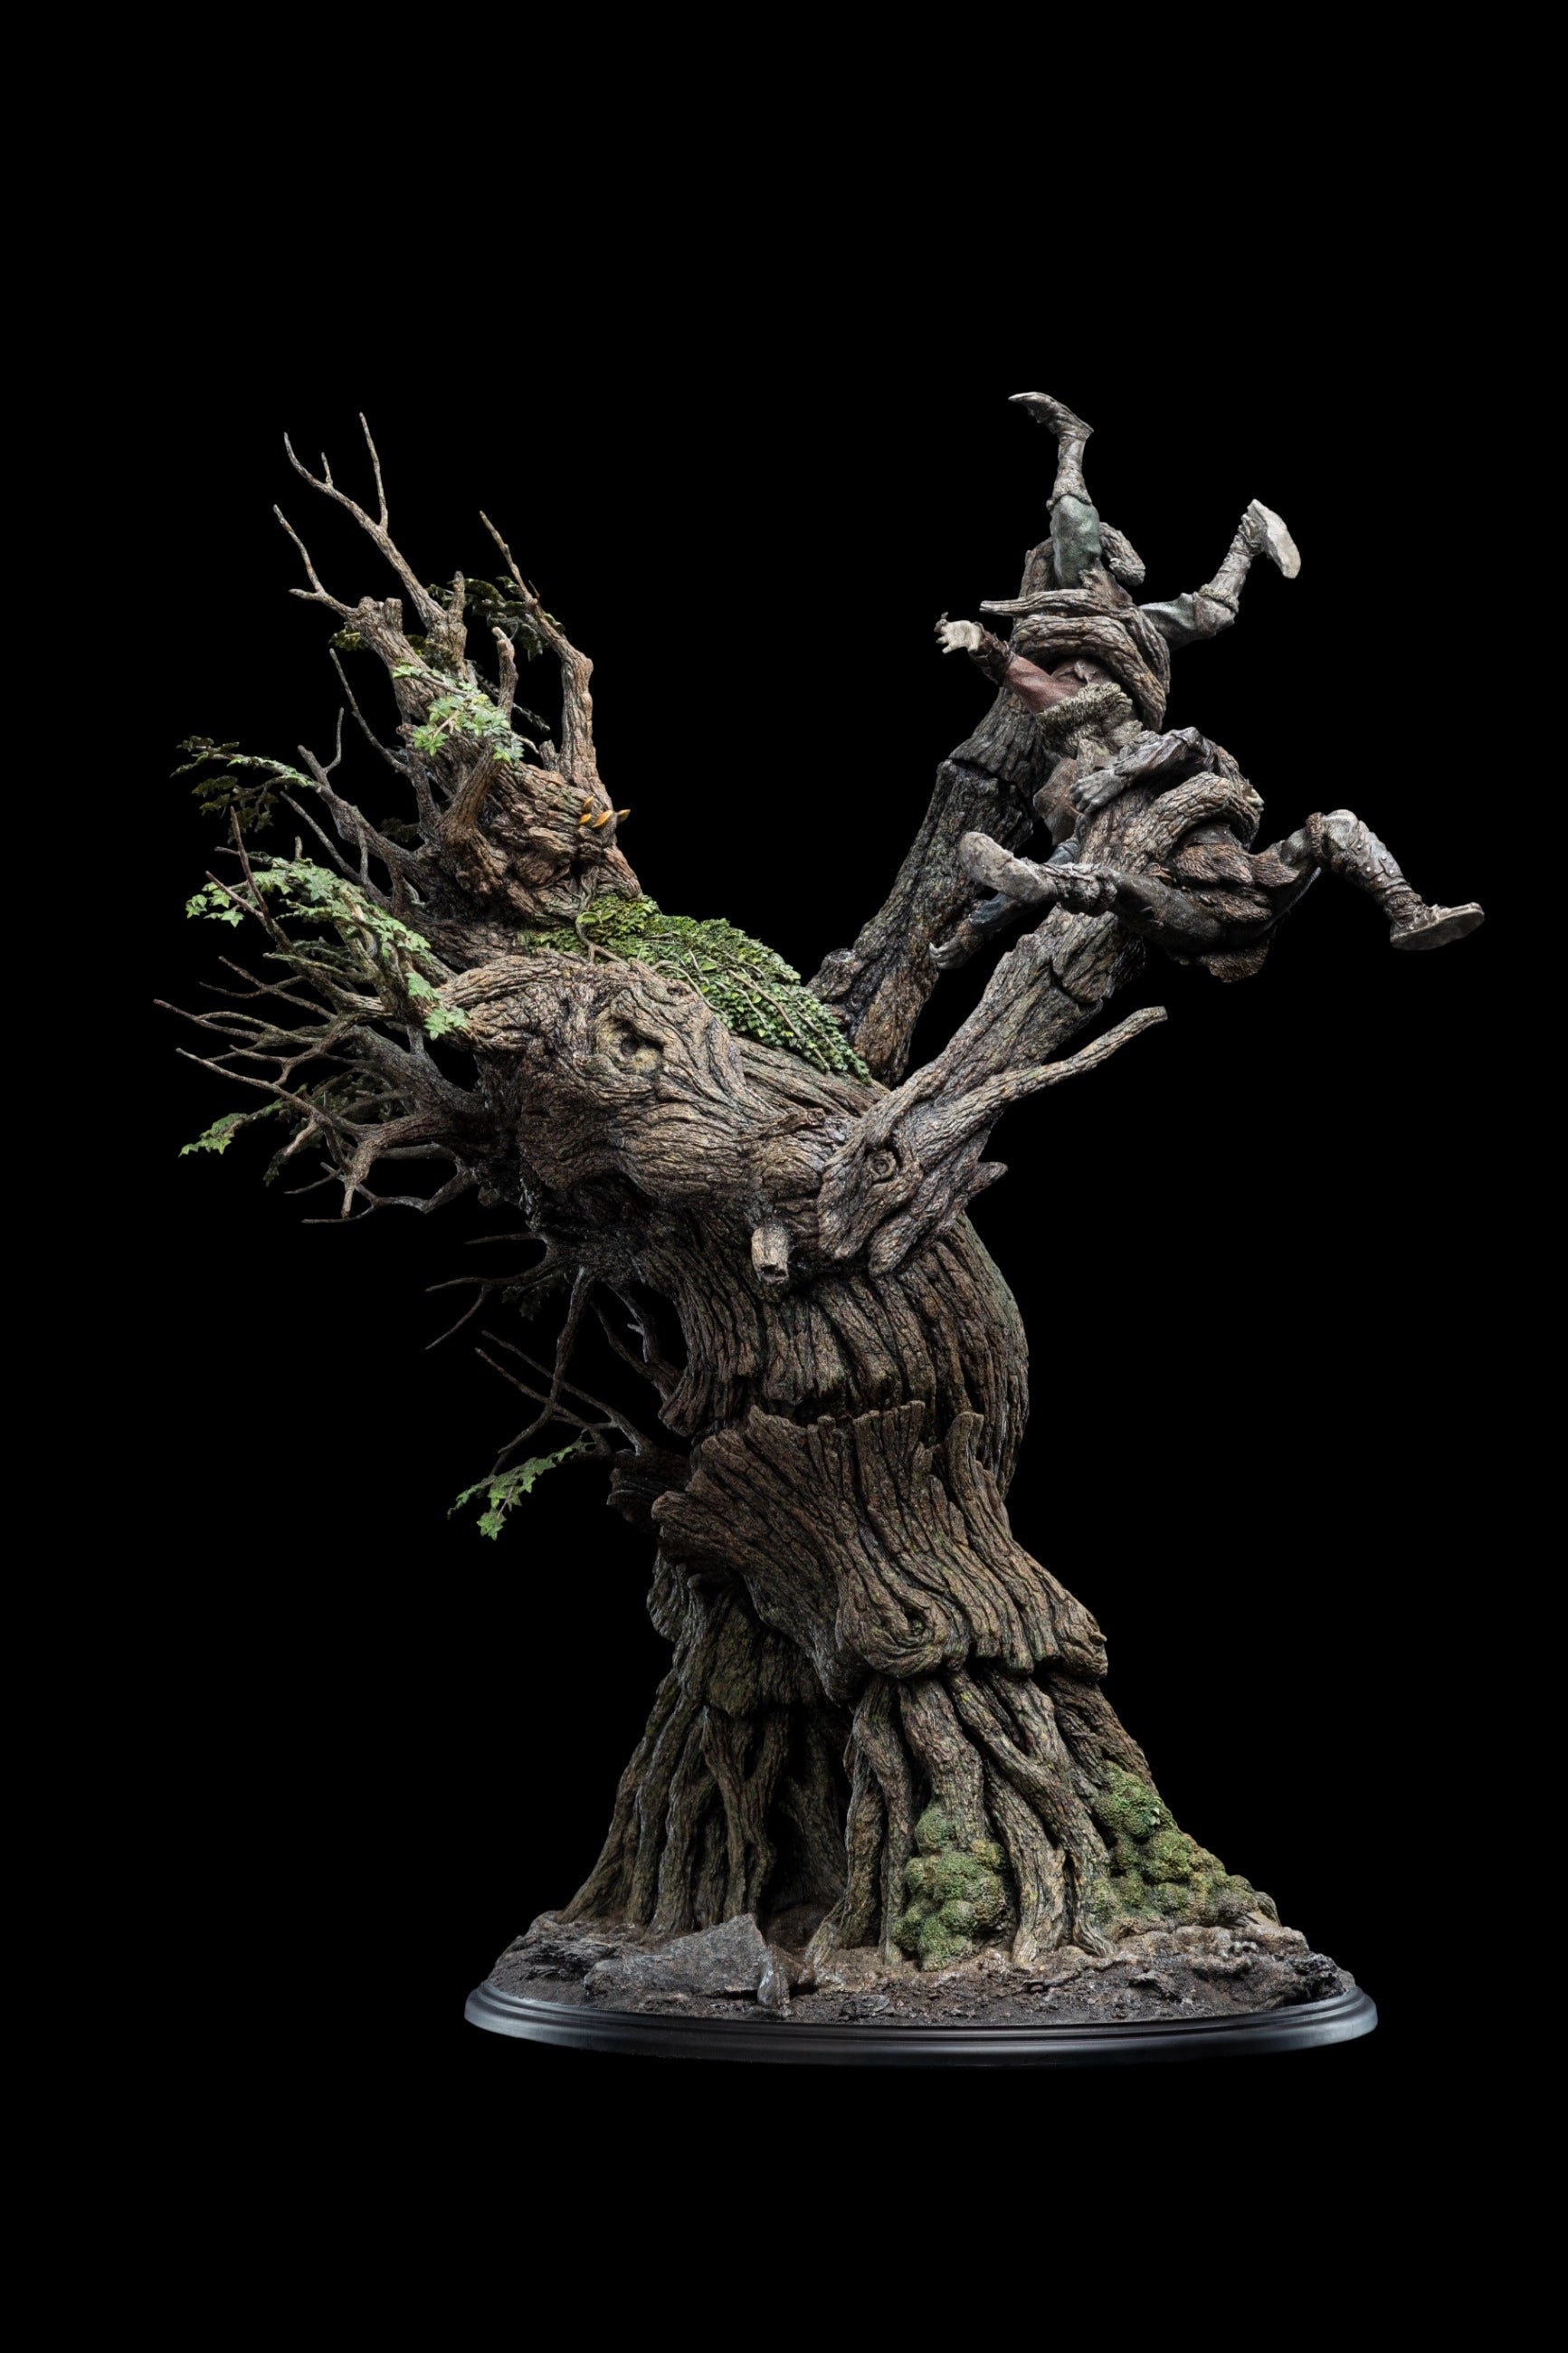 Leaflock the Ent - The Lord of the Rings Trilogy 1:6 Scale Limited Edition Polystone Statue